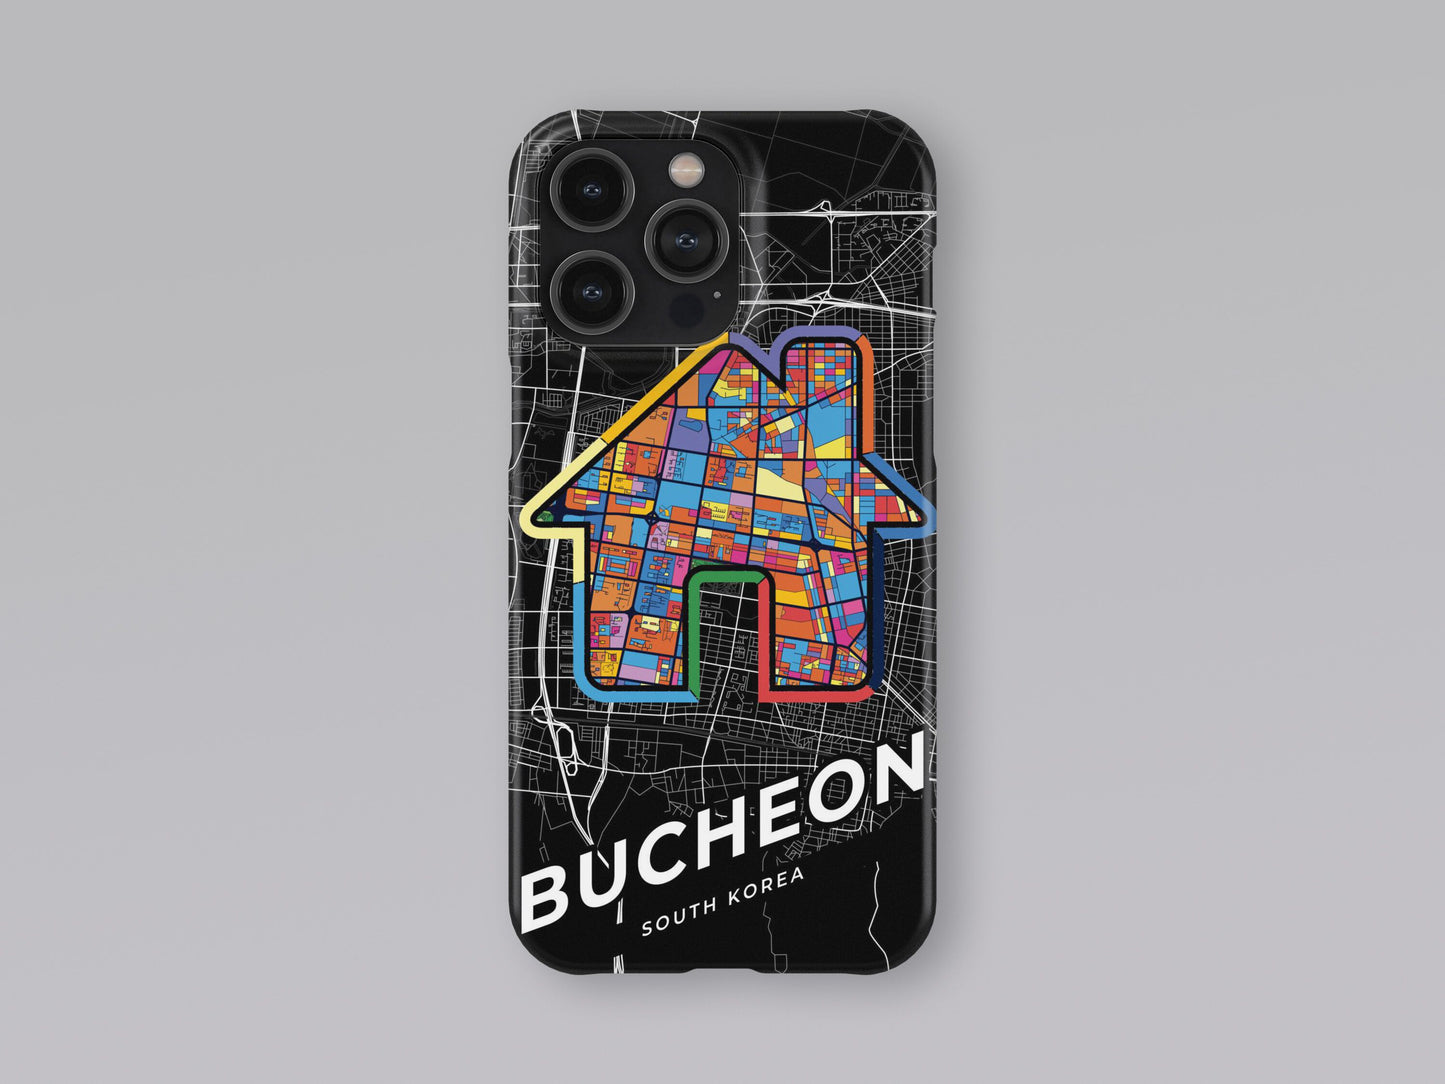 Bucheon South Korea slim phone case with colorful icon. Birthday, wedding or housewarming gift. Couple match cases. 3